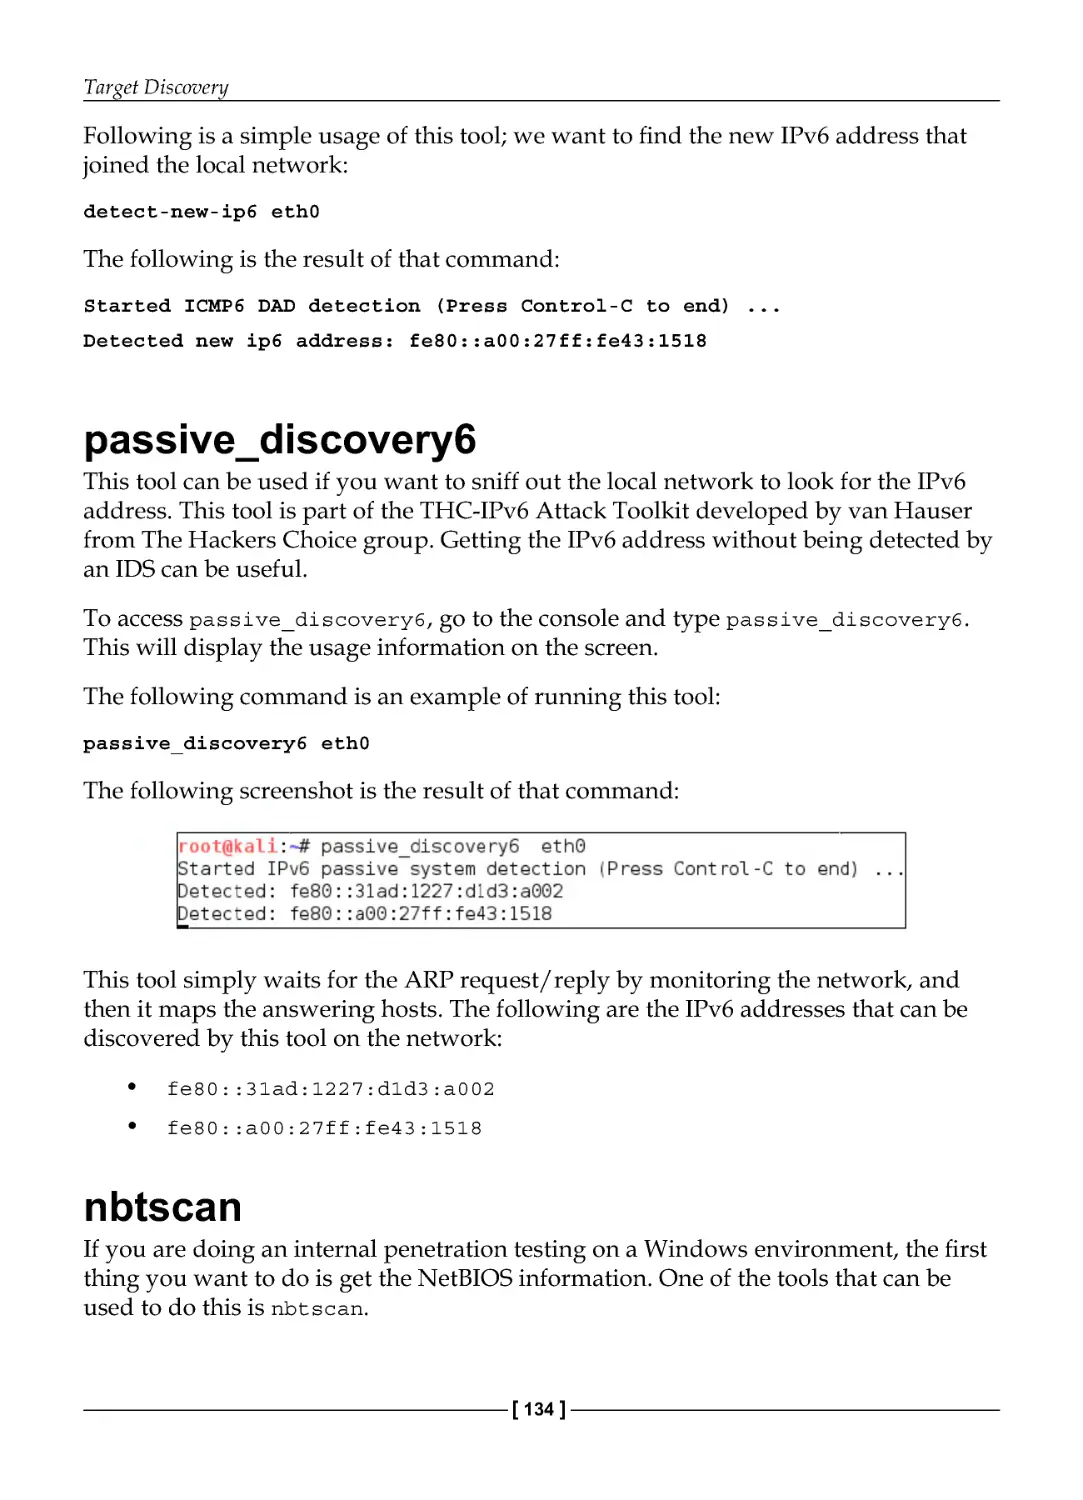 passive_discovery6
nbtscan